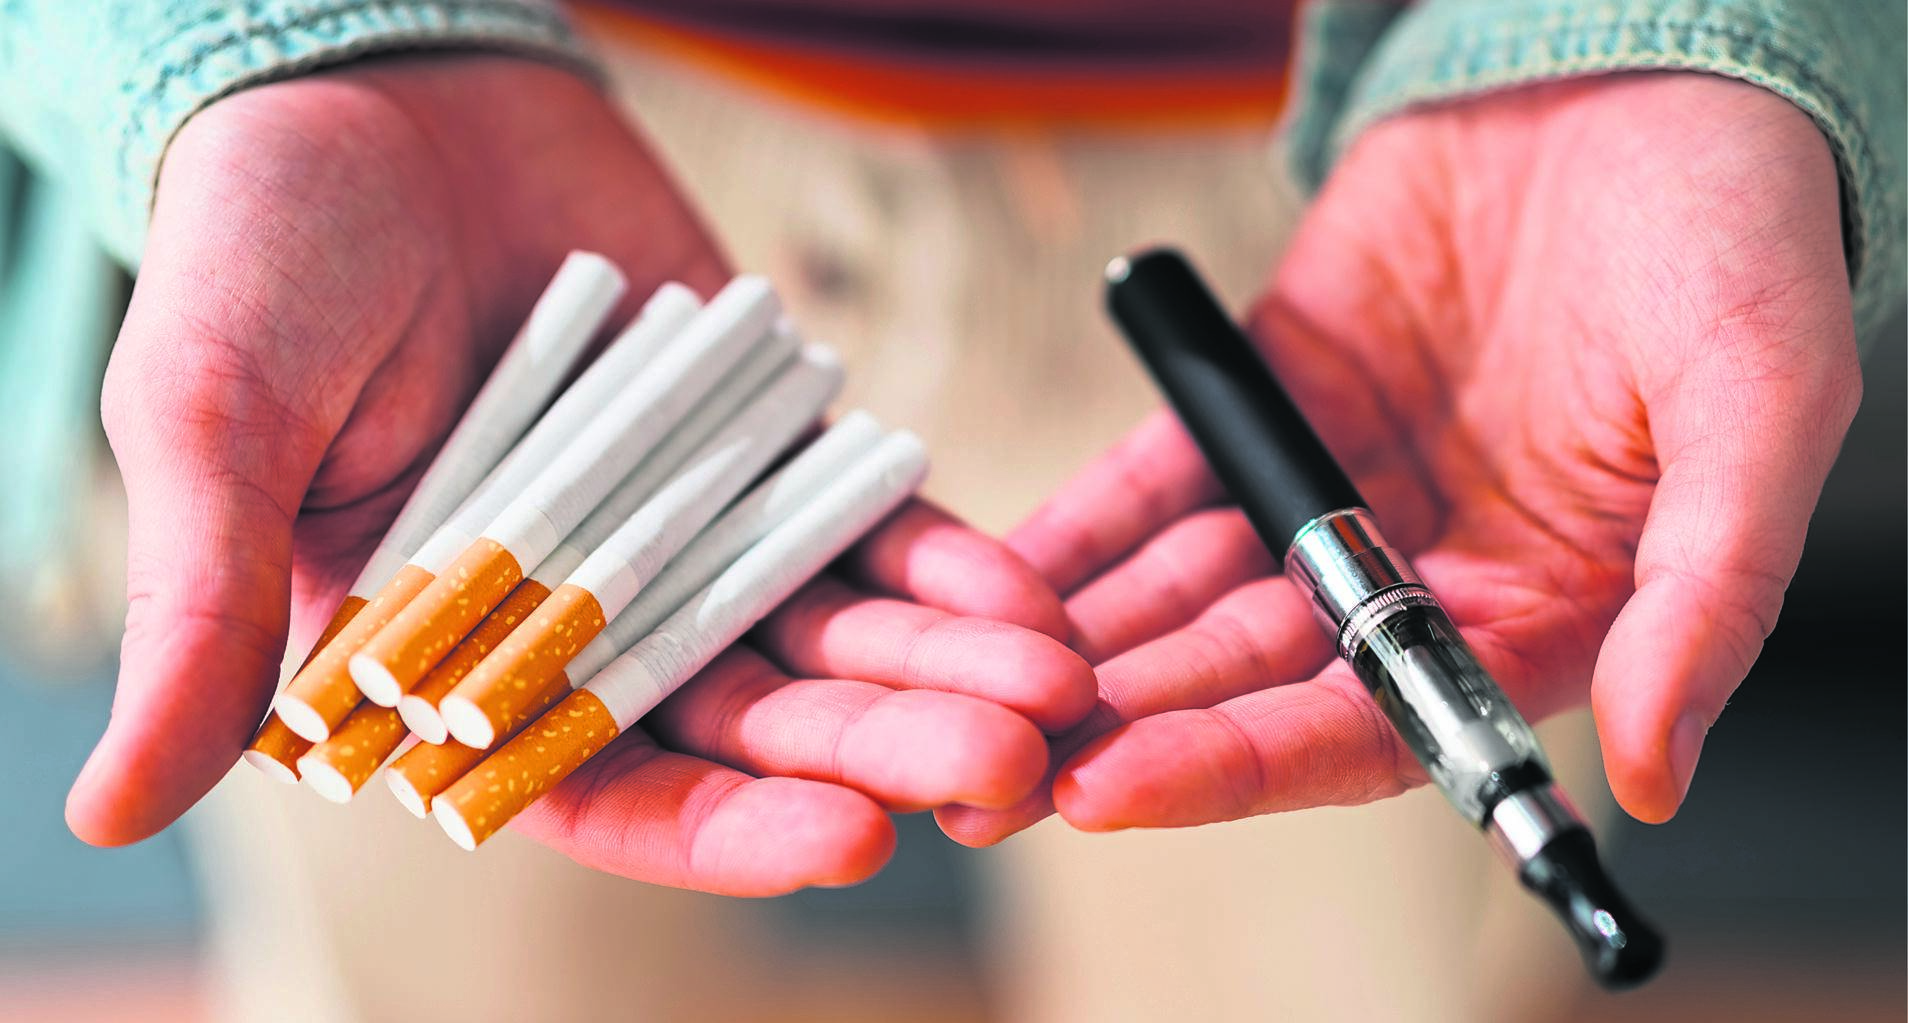 Research increasingly points to vaping being less harmful than smoking tobacco. Photo: Supplied